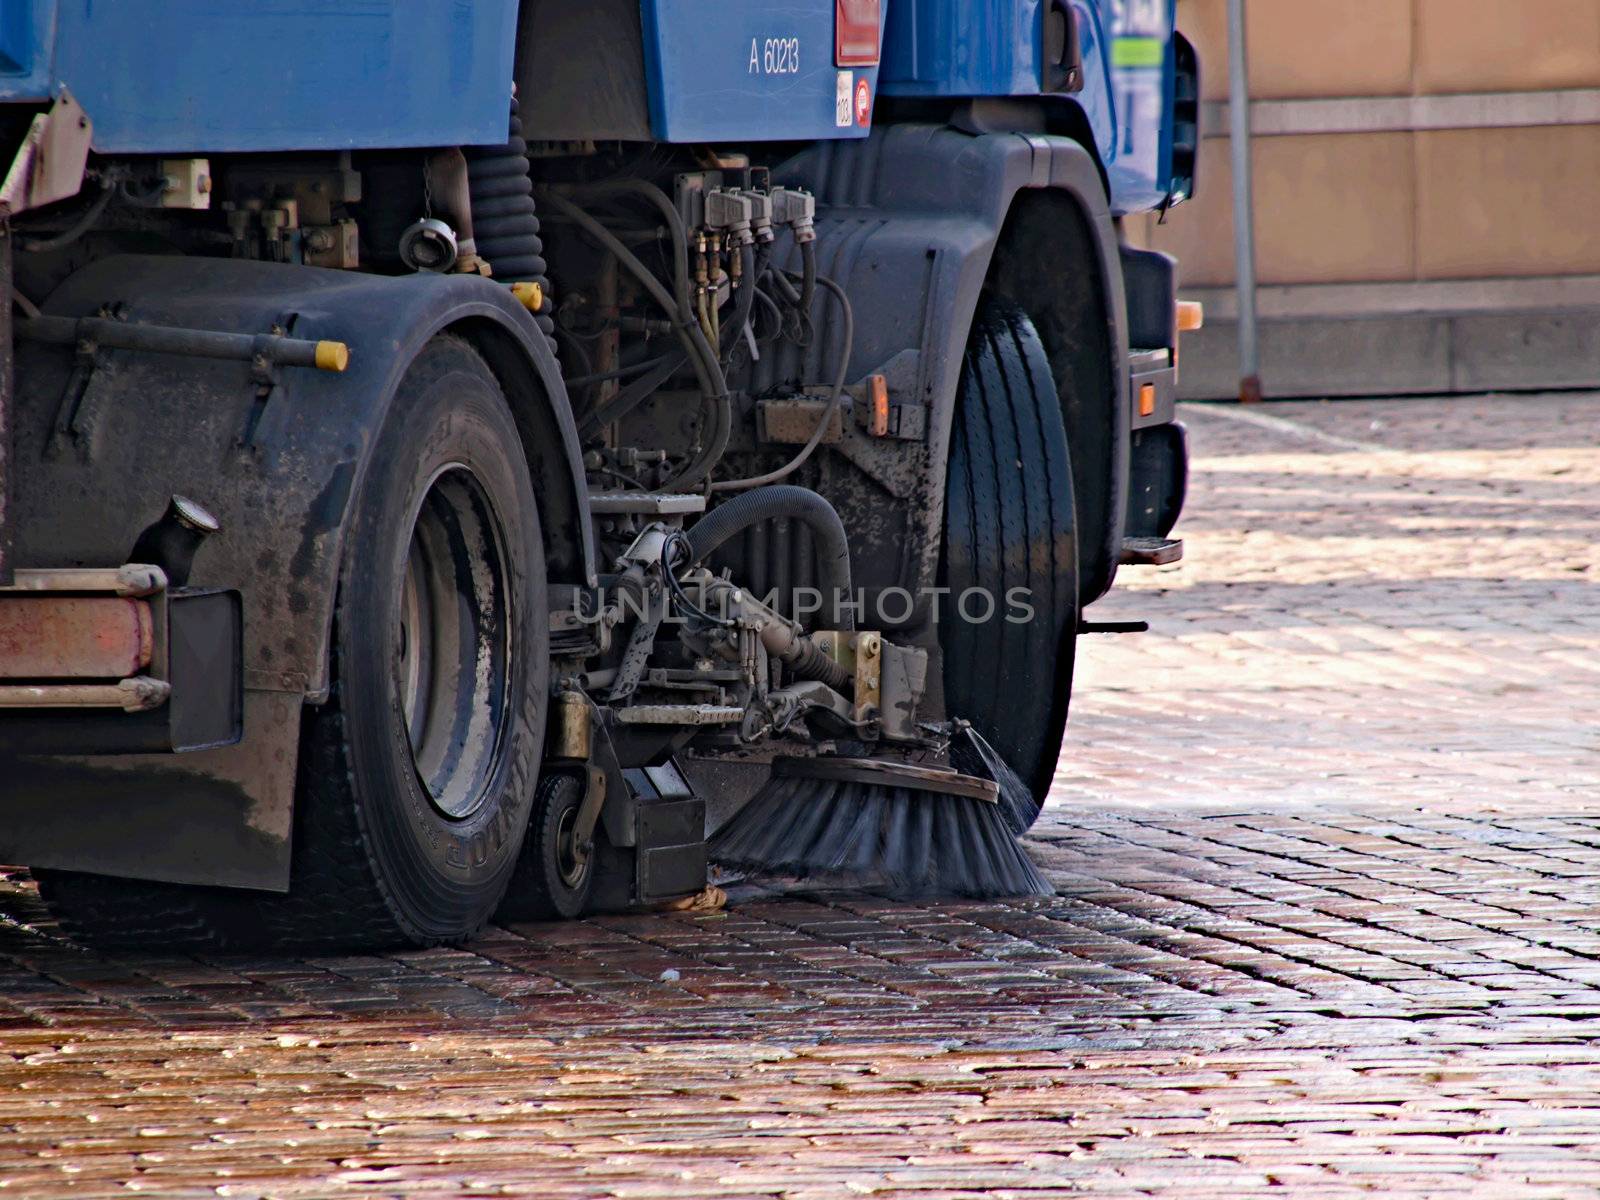 street cleaning machine by dotweb